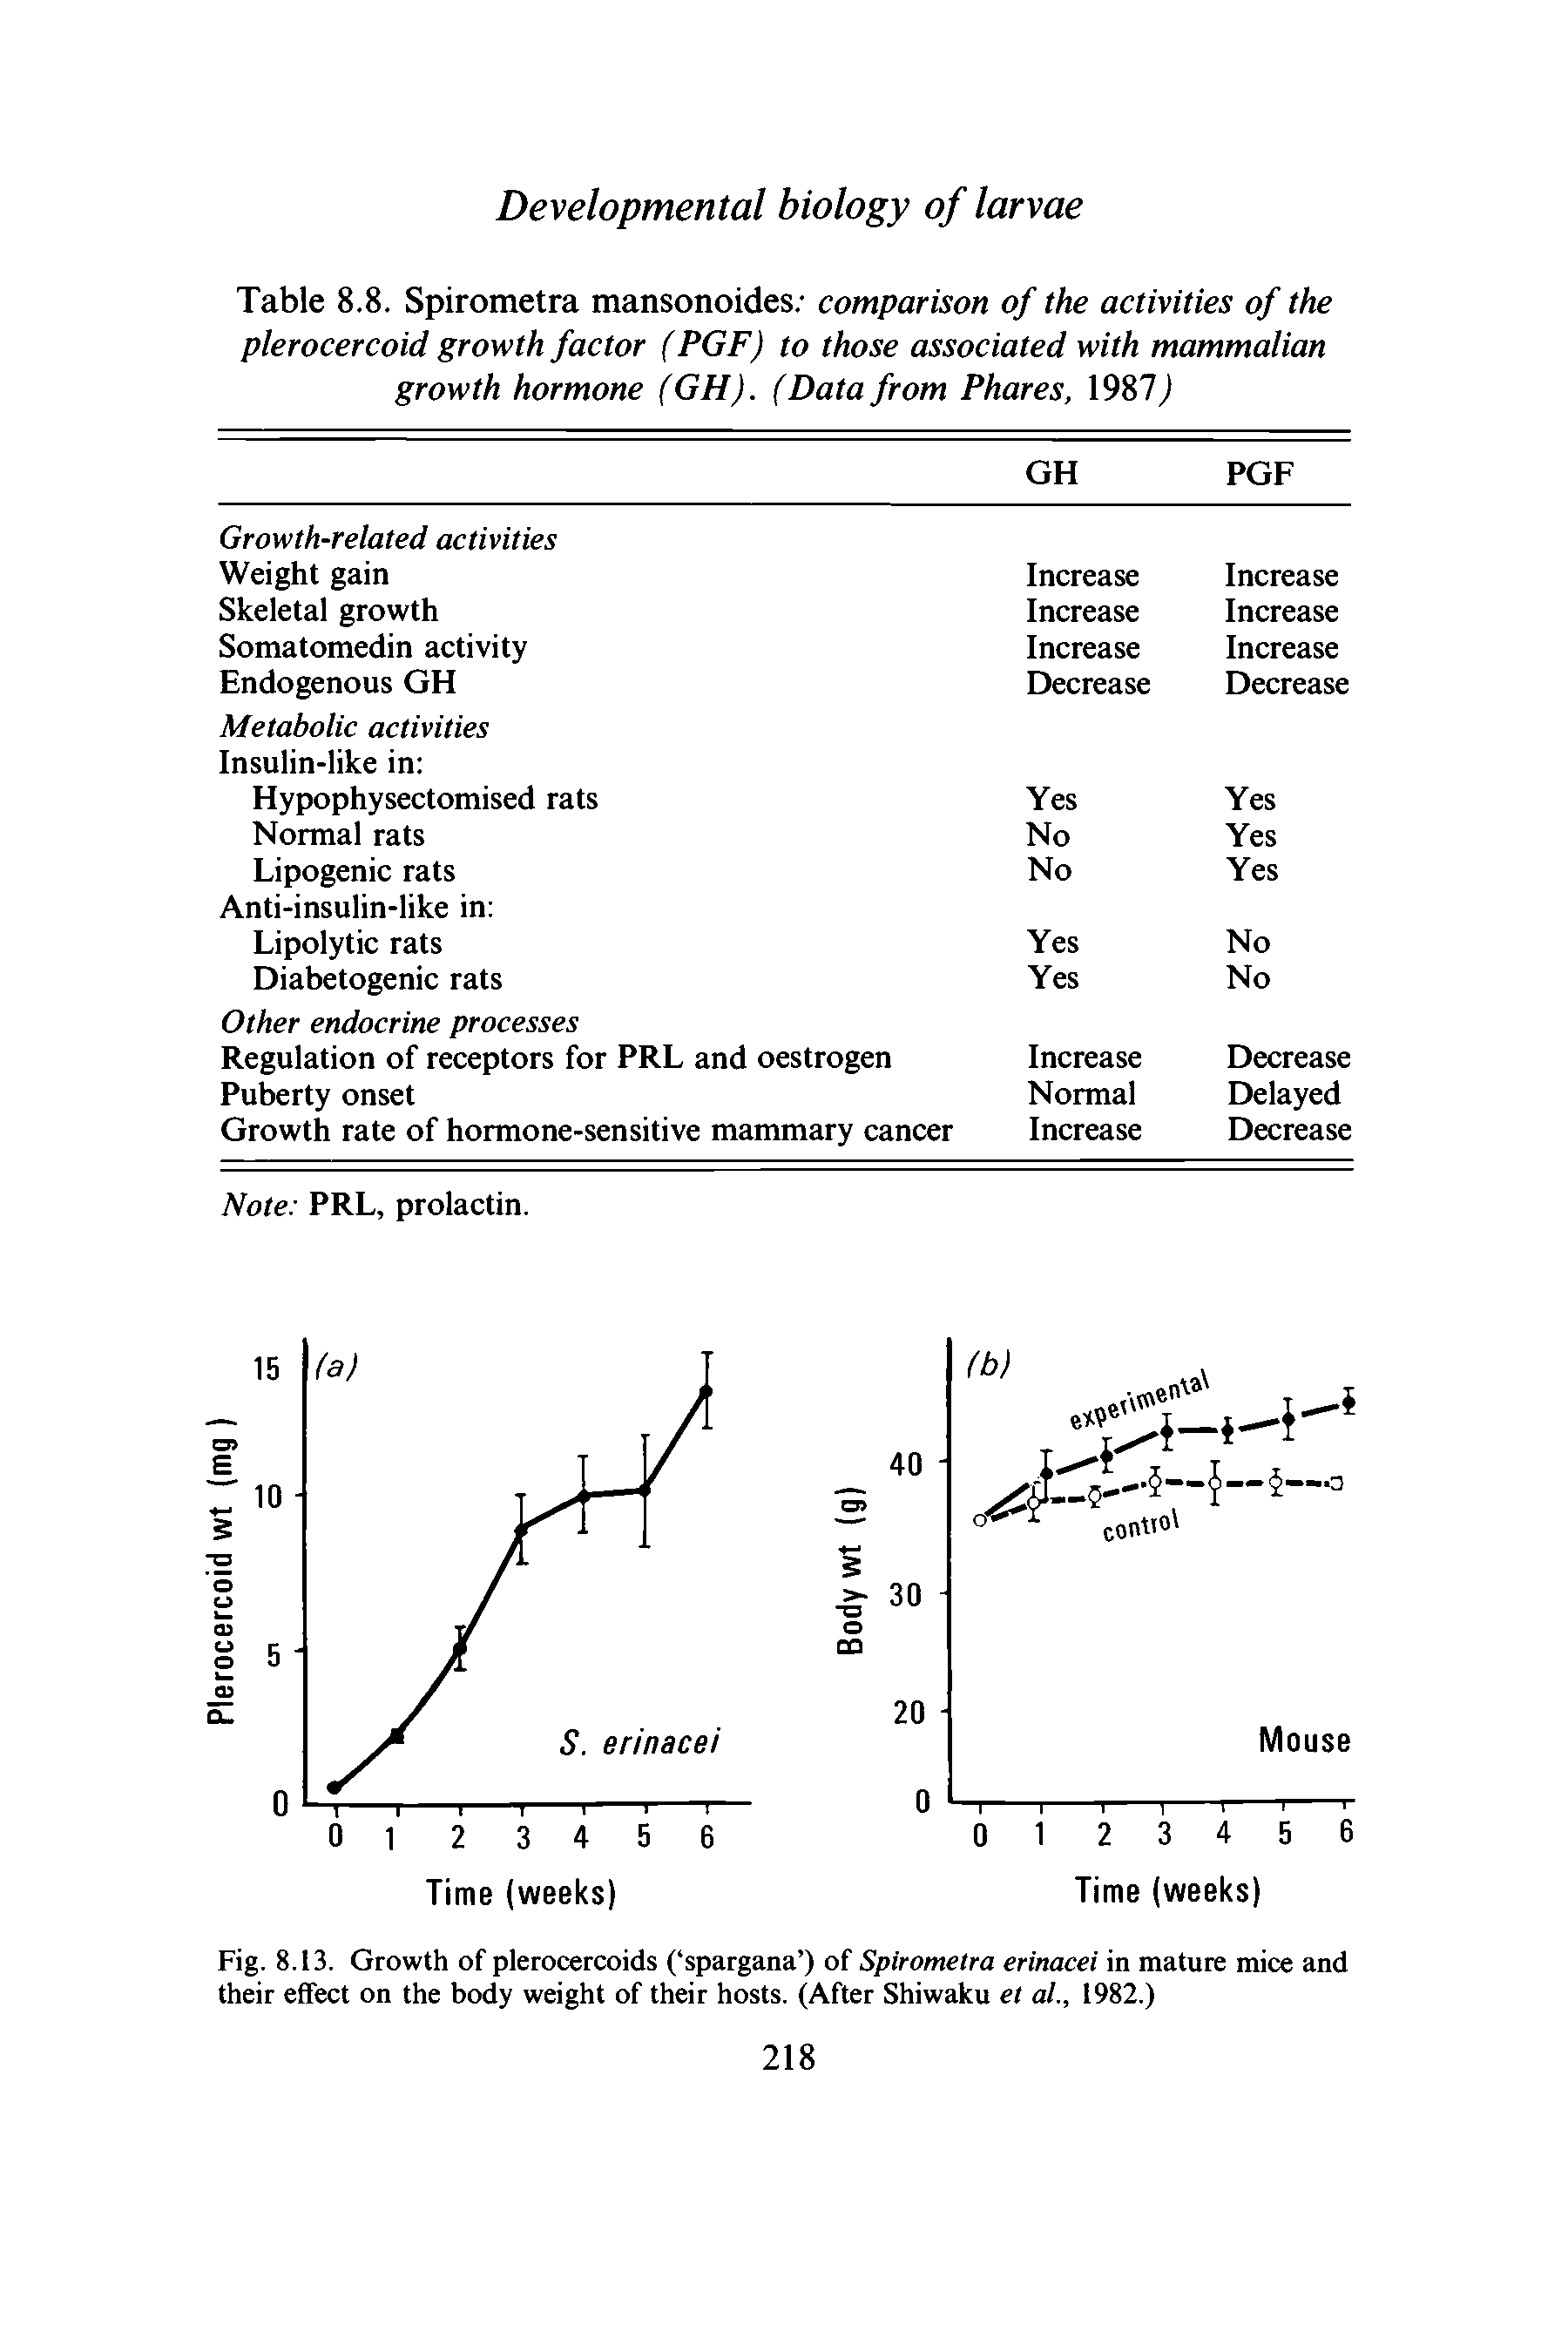 Table 8.8. Spirometra mansonoides comparison of the activities of the plerocercoid growth factor (PGF) to those associated with mammalian growth hormone (GH). (Data from Phares, 1987 ...